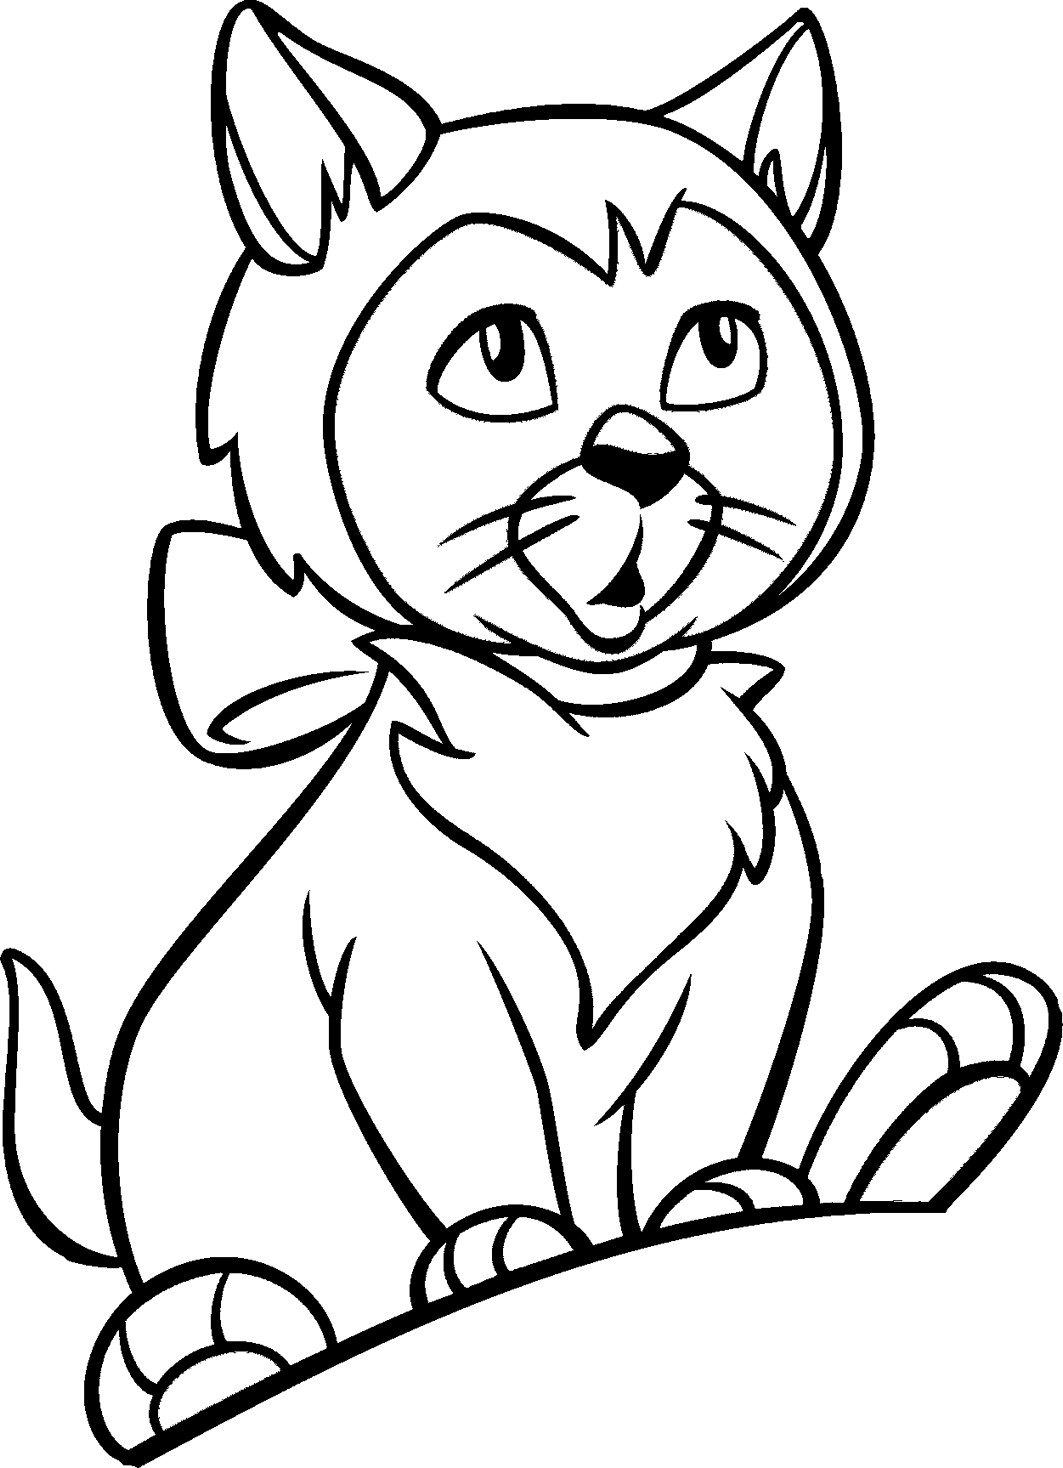 Fun Coloring Pages For Kids
 Coloring Pages for Kids Cat Coloring Pages for Kids